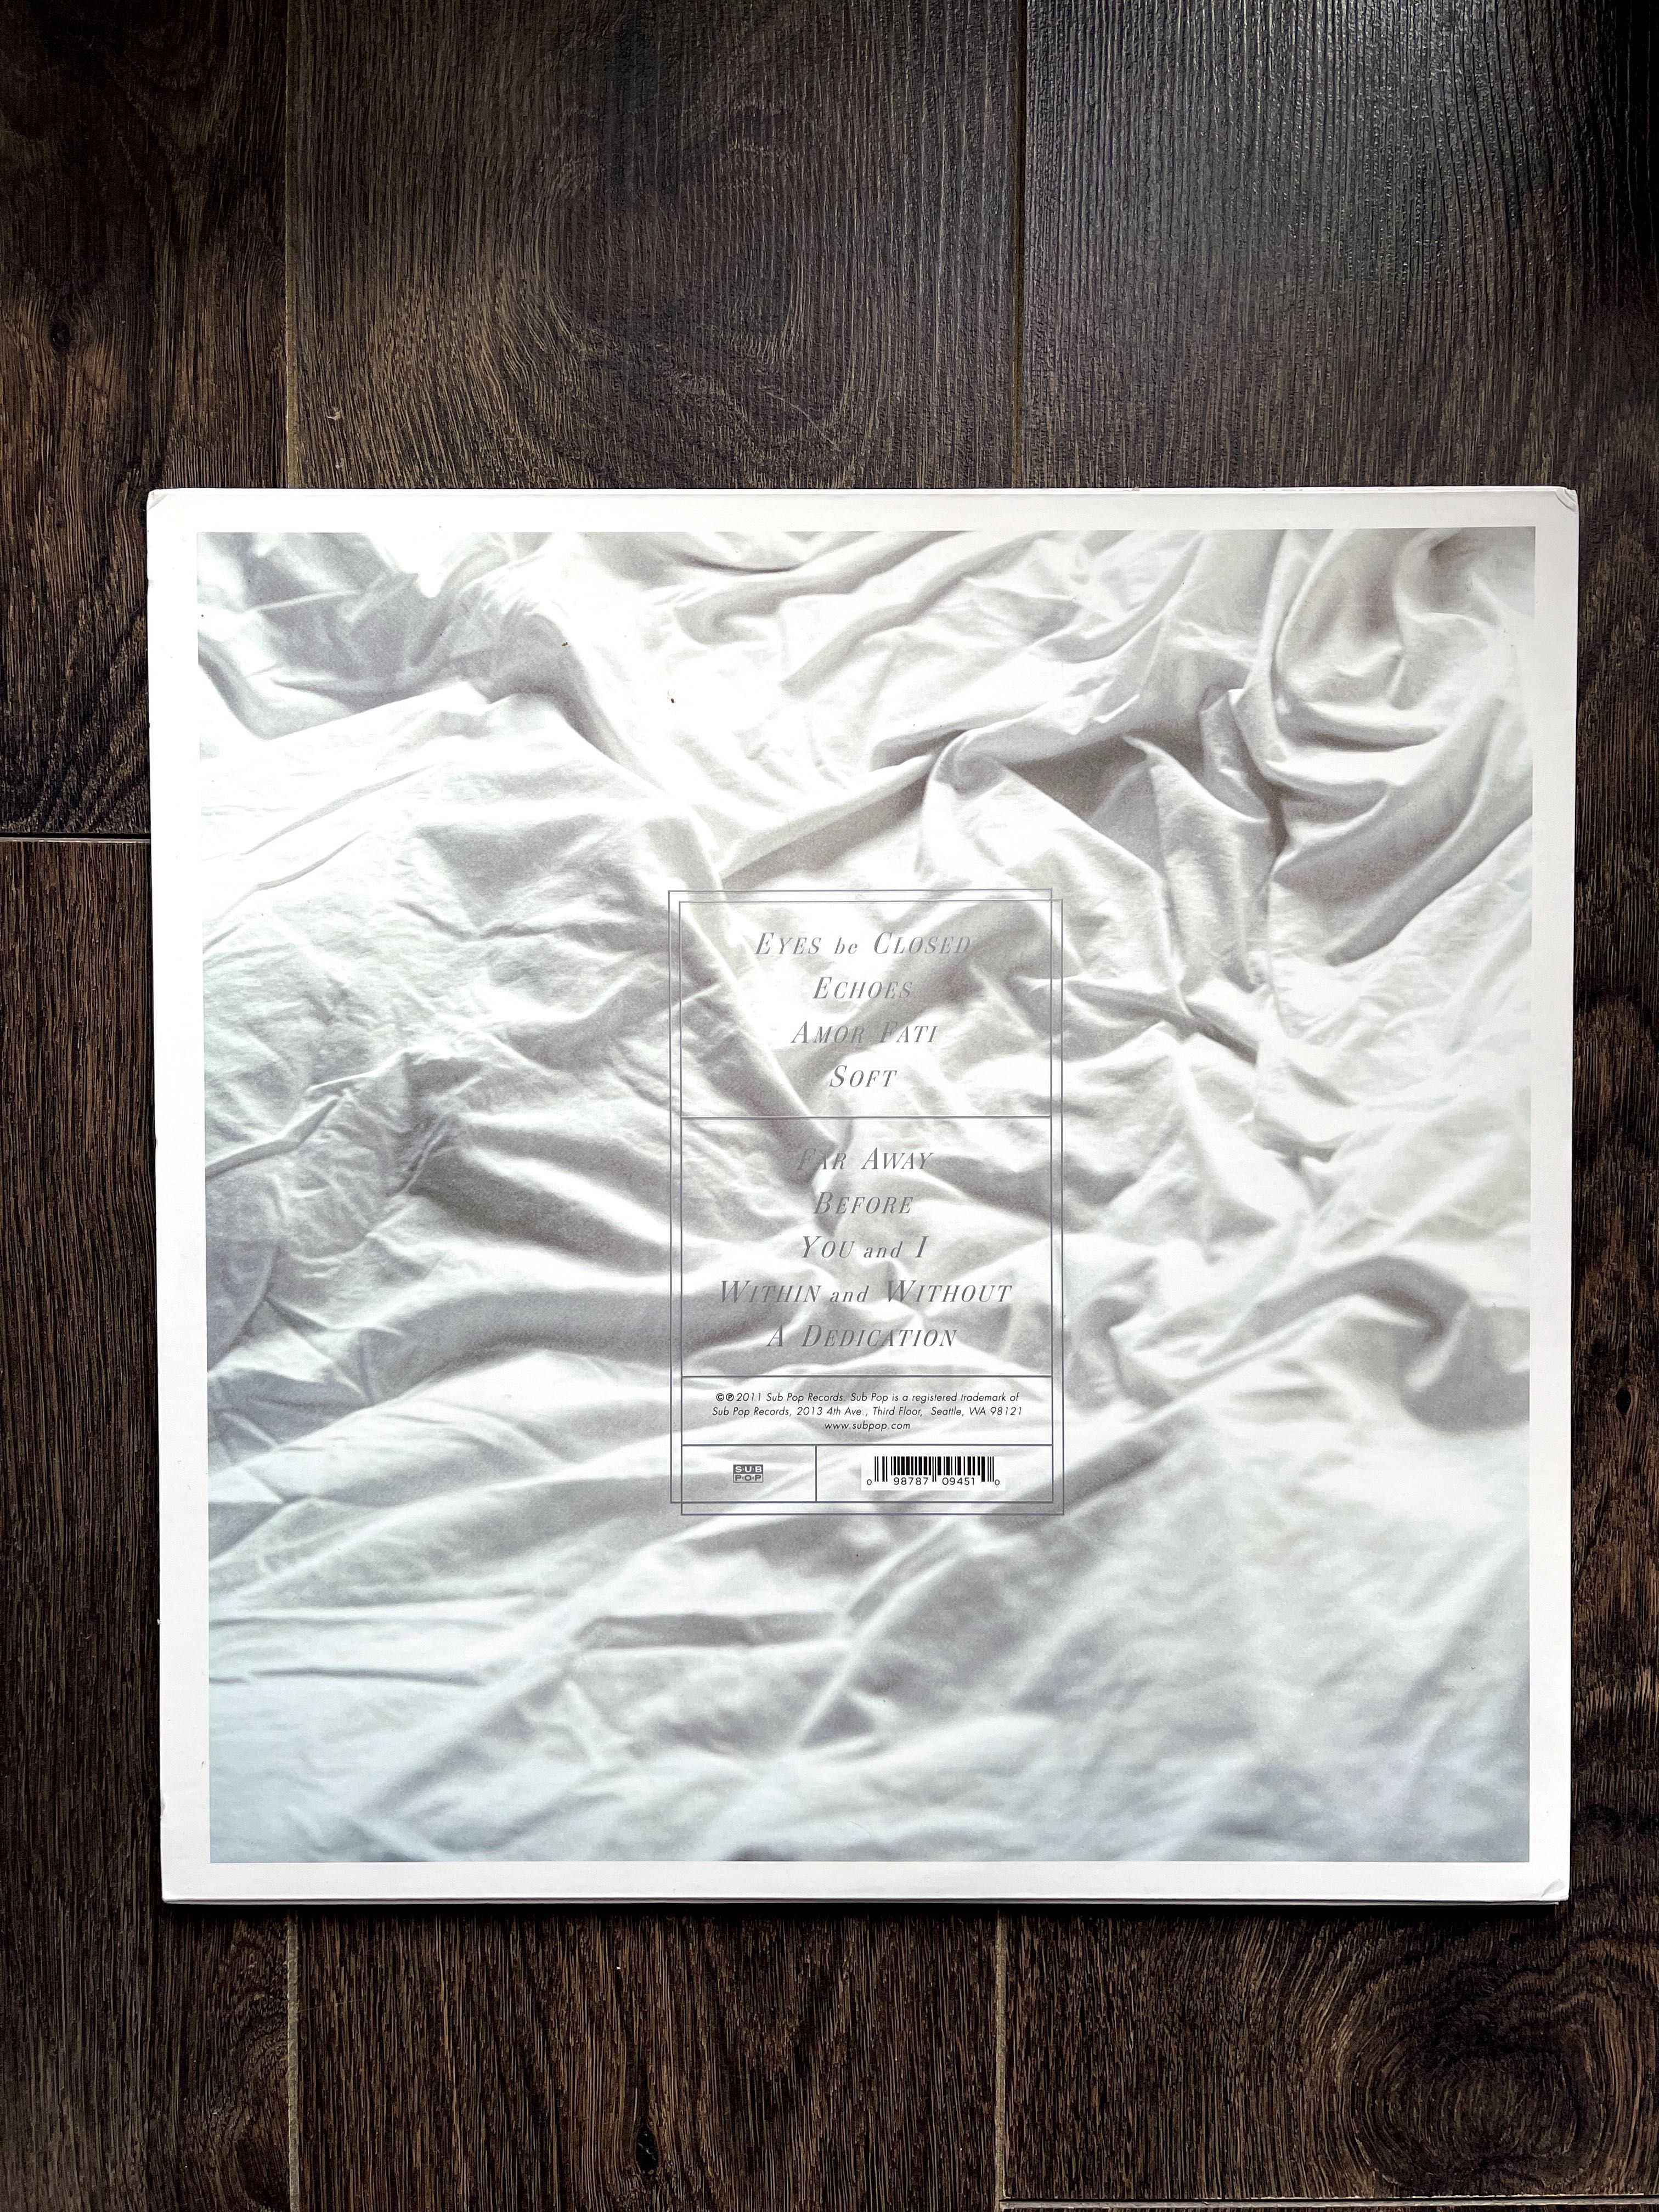 Washed Out - Within and Without (white LP) - płyta winylowa, chillwave